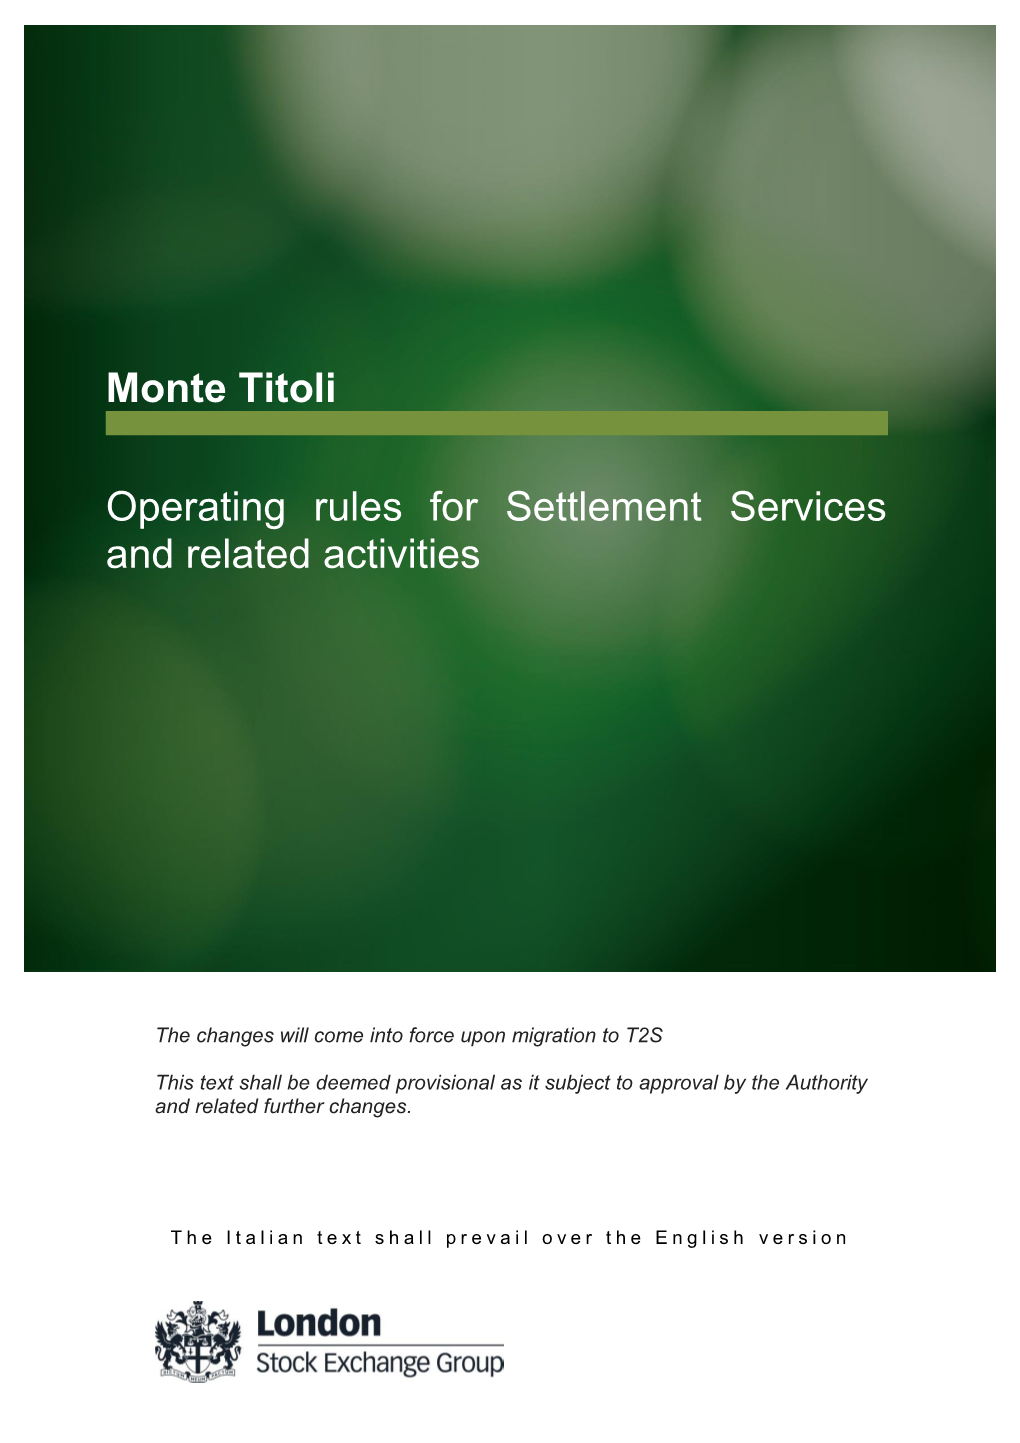 Monte Titoli Operating Rules for Settlement Services and Related